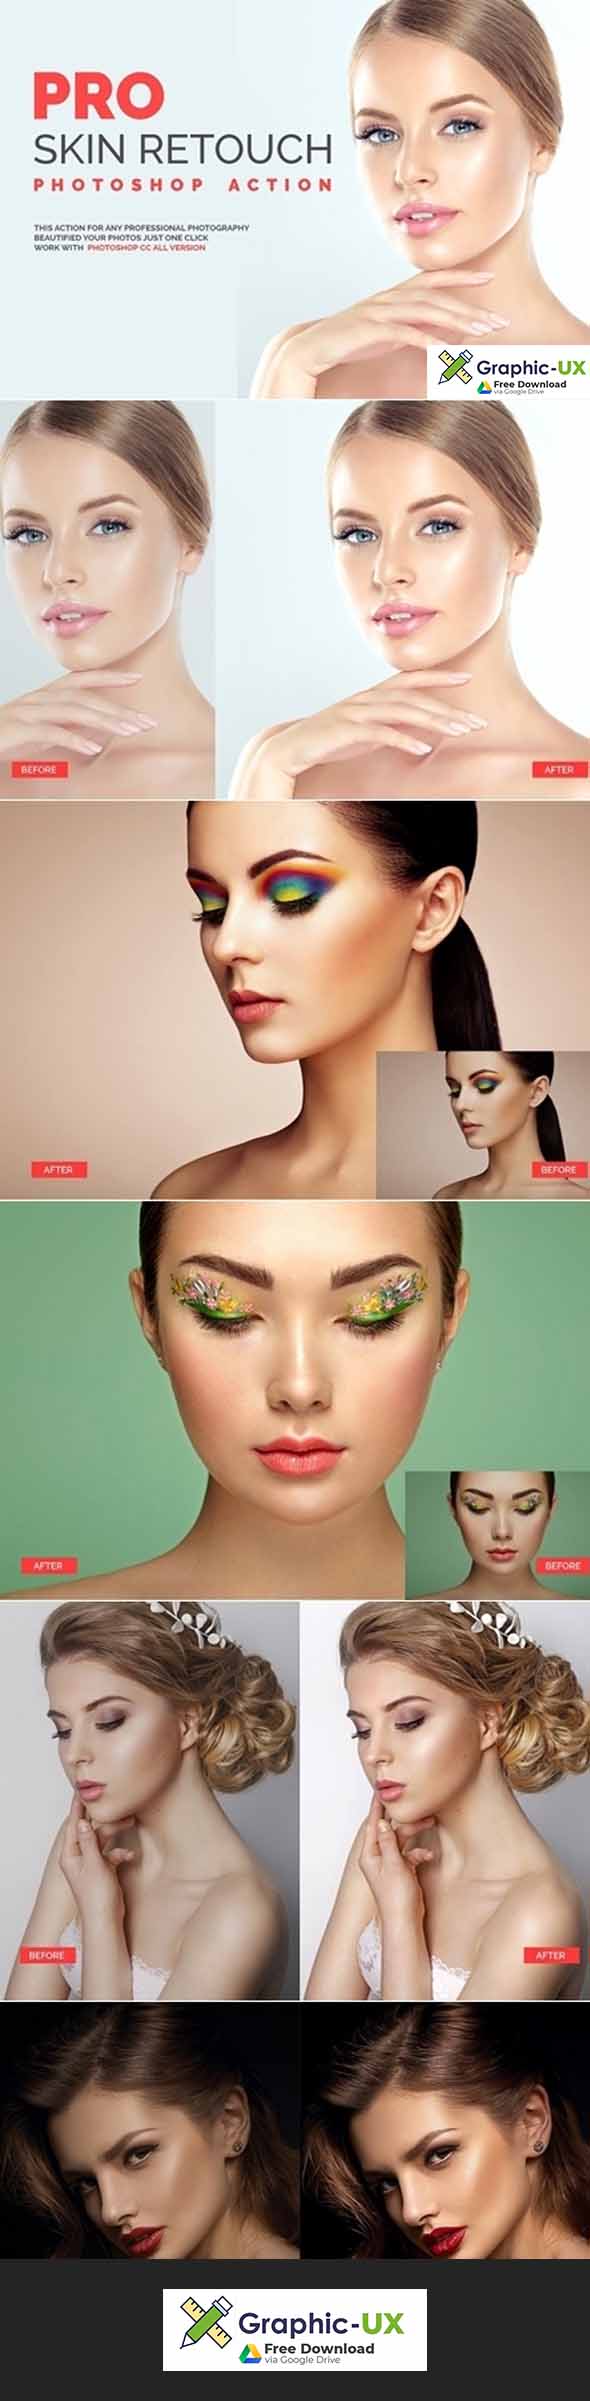 pro skin retouch photoshop action free download